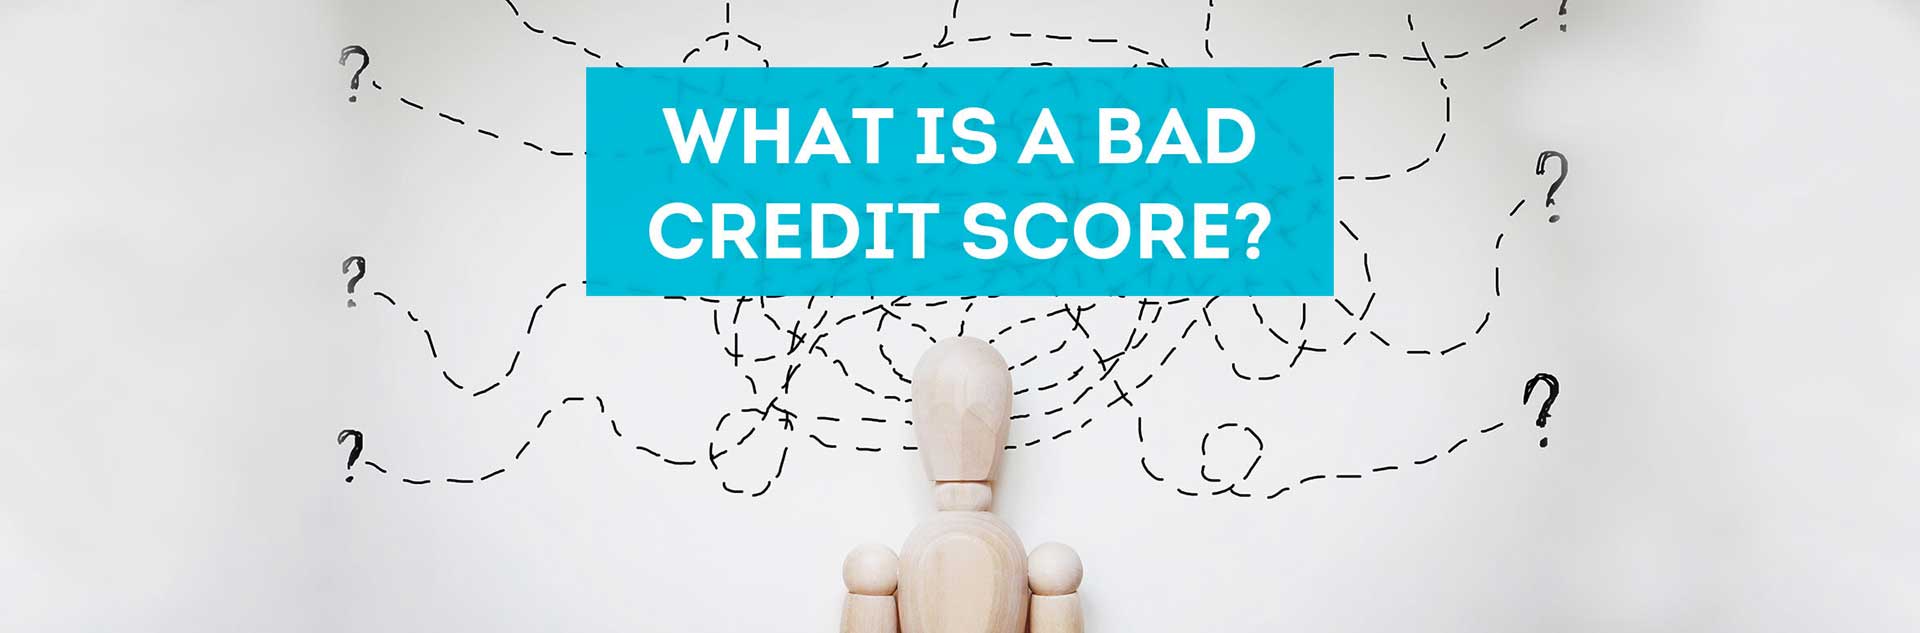 what is a “bad” credit score for potential renters?